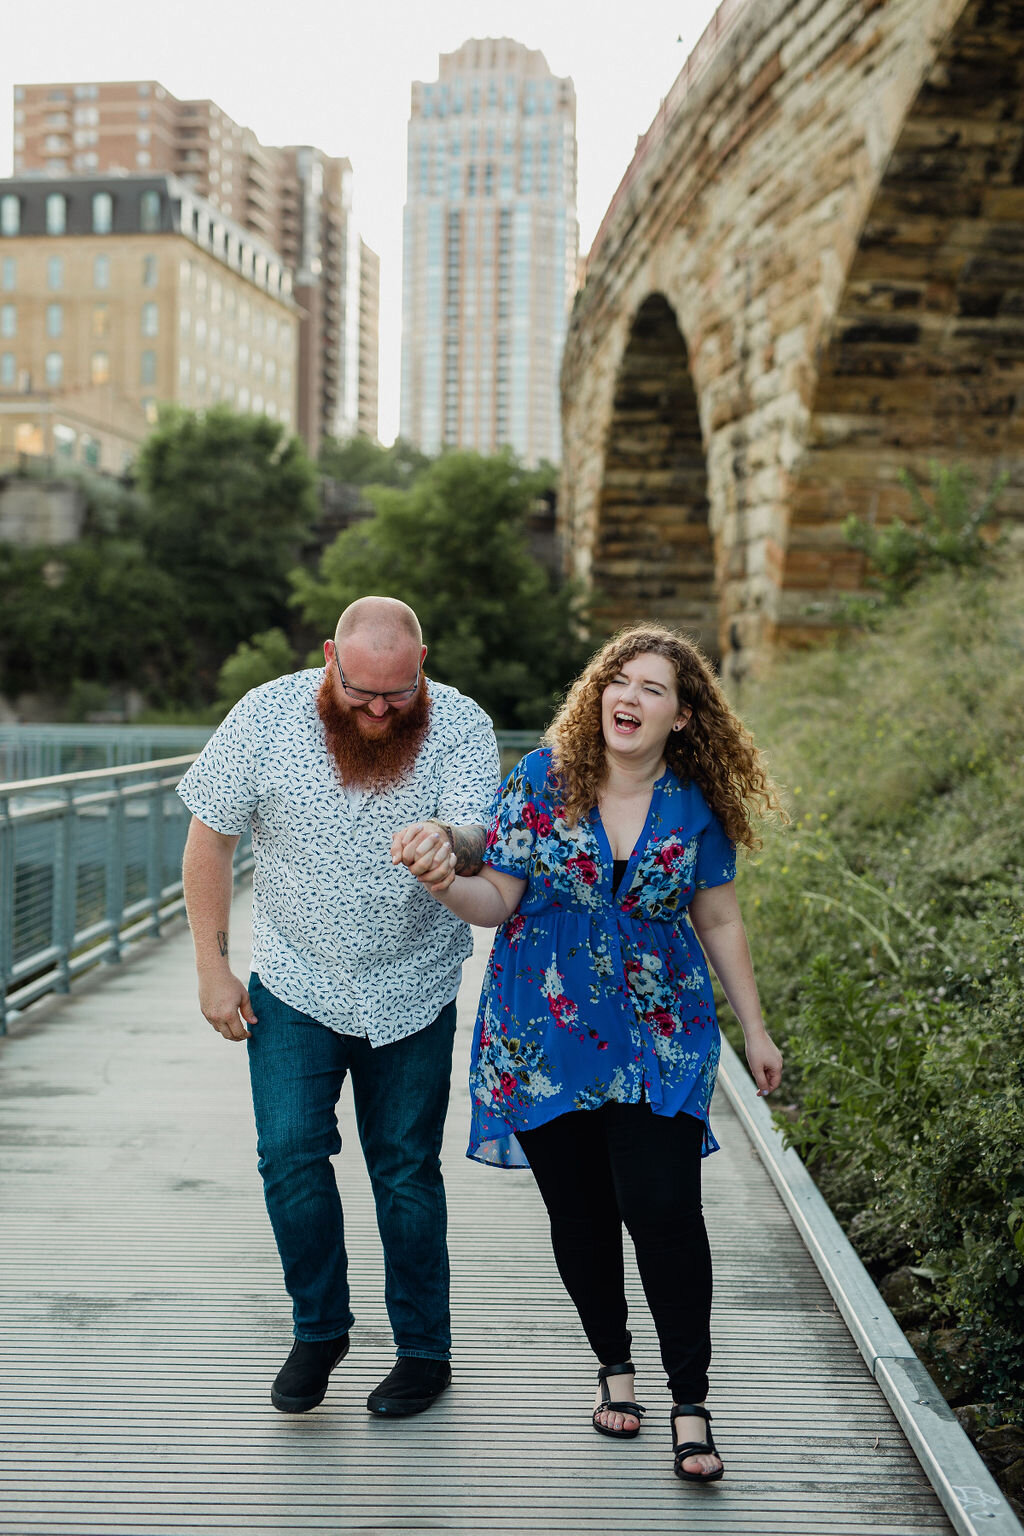 03_mississippi-river_downtown-minneapolis_st-anthony-main_stone-arch-bridge_engagement-session.jpg